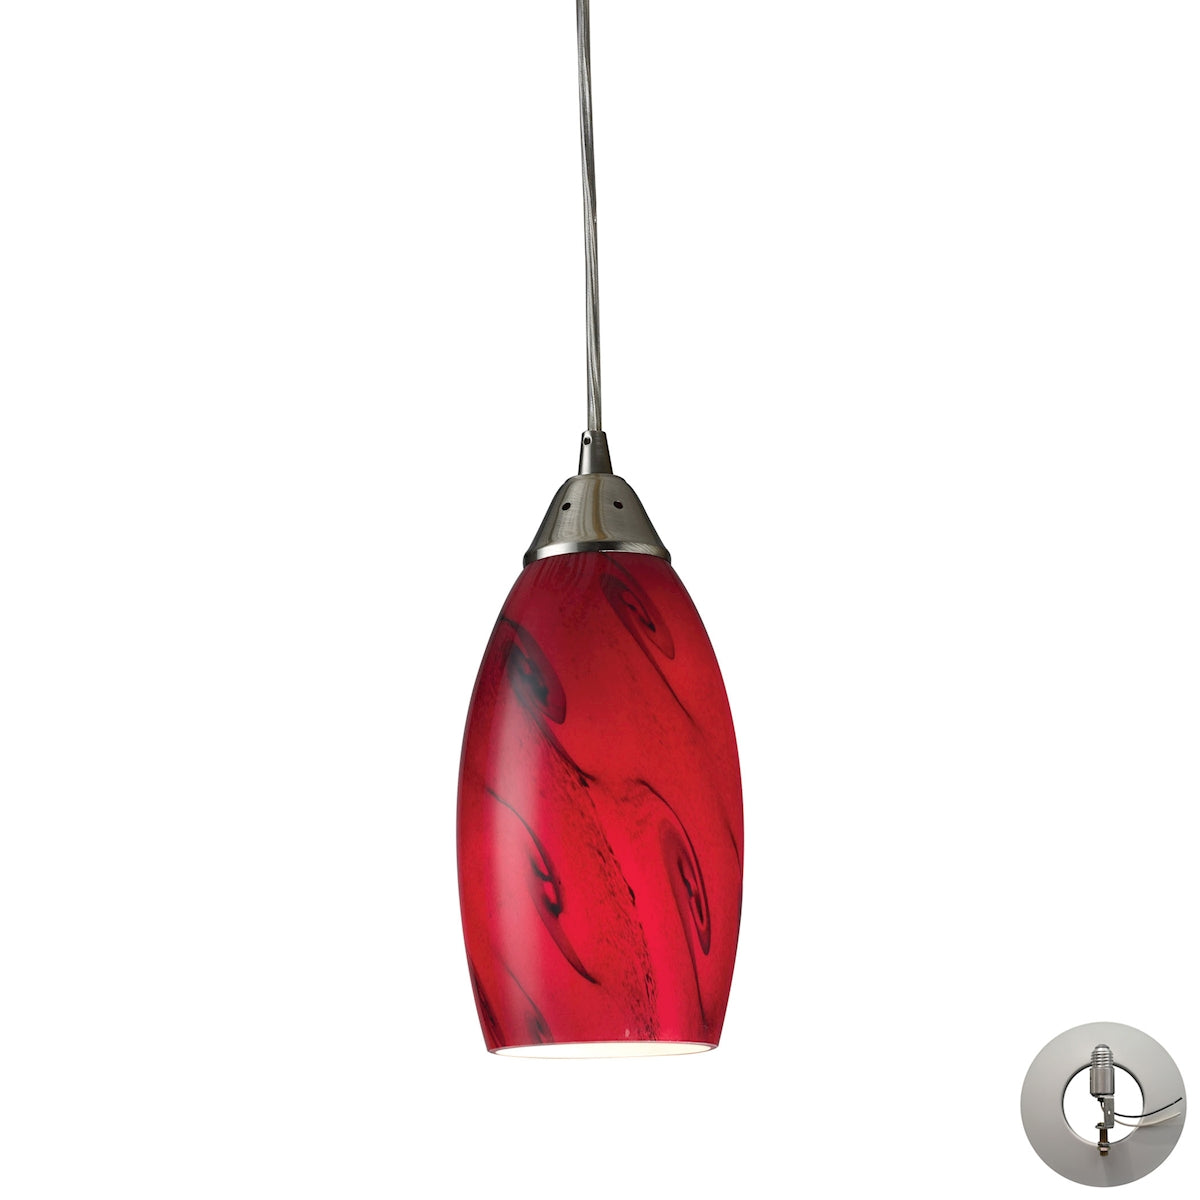 ELK Lighting 20001/1RG-LA Galaxy 1-Light Mini Pendant in Satin Nickel with Red Glass - Includes Adapter Kit